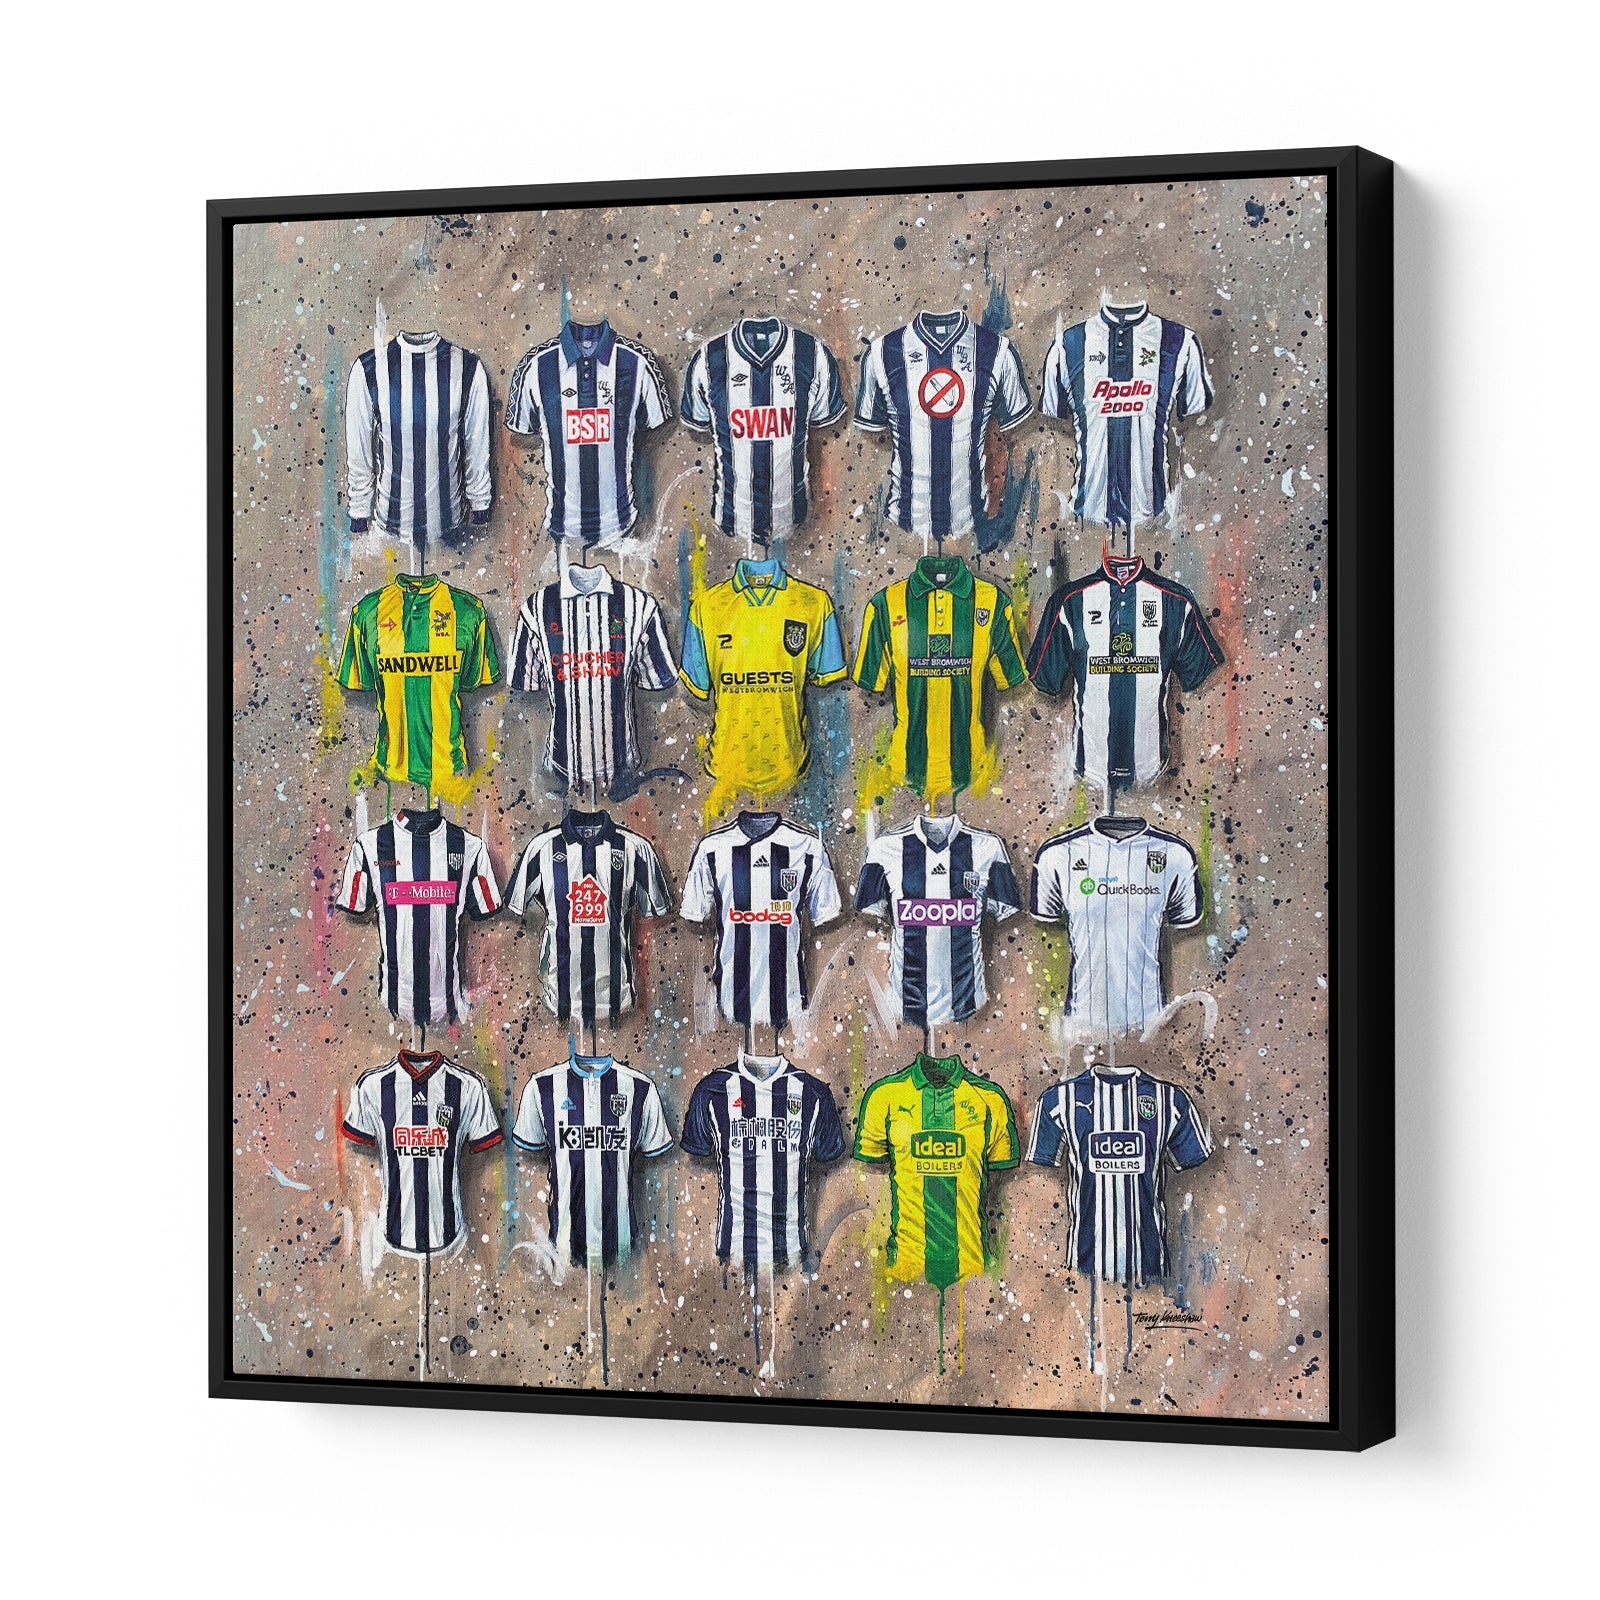 These West Brom Canvases by Terry Kneeshaw come in various sizes and styles, allowing you to choose from 20x20, 30x30, or 40x40 framed or unframed black floating frames. The artwork features images of the team in action and is perfect for any fan of West Brom. The canvases capture the energy and excitement of the sport and make a great addition to any room in the house, from the living room to the game room.